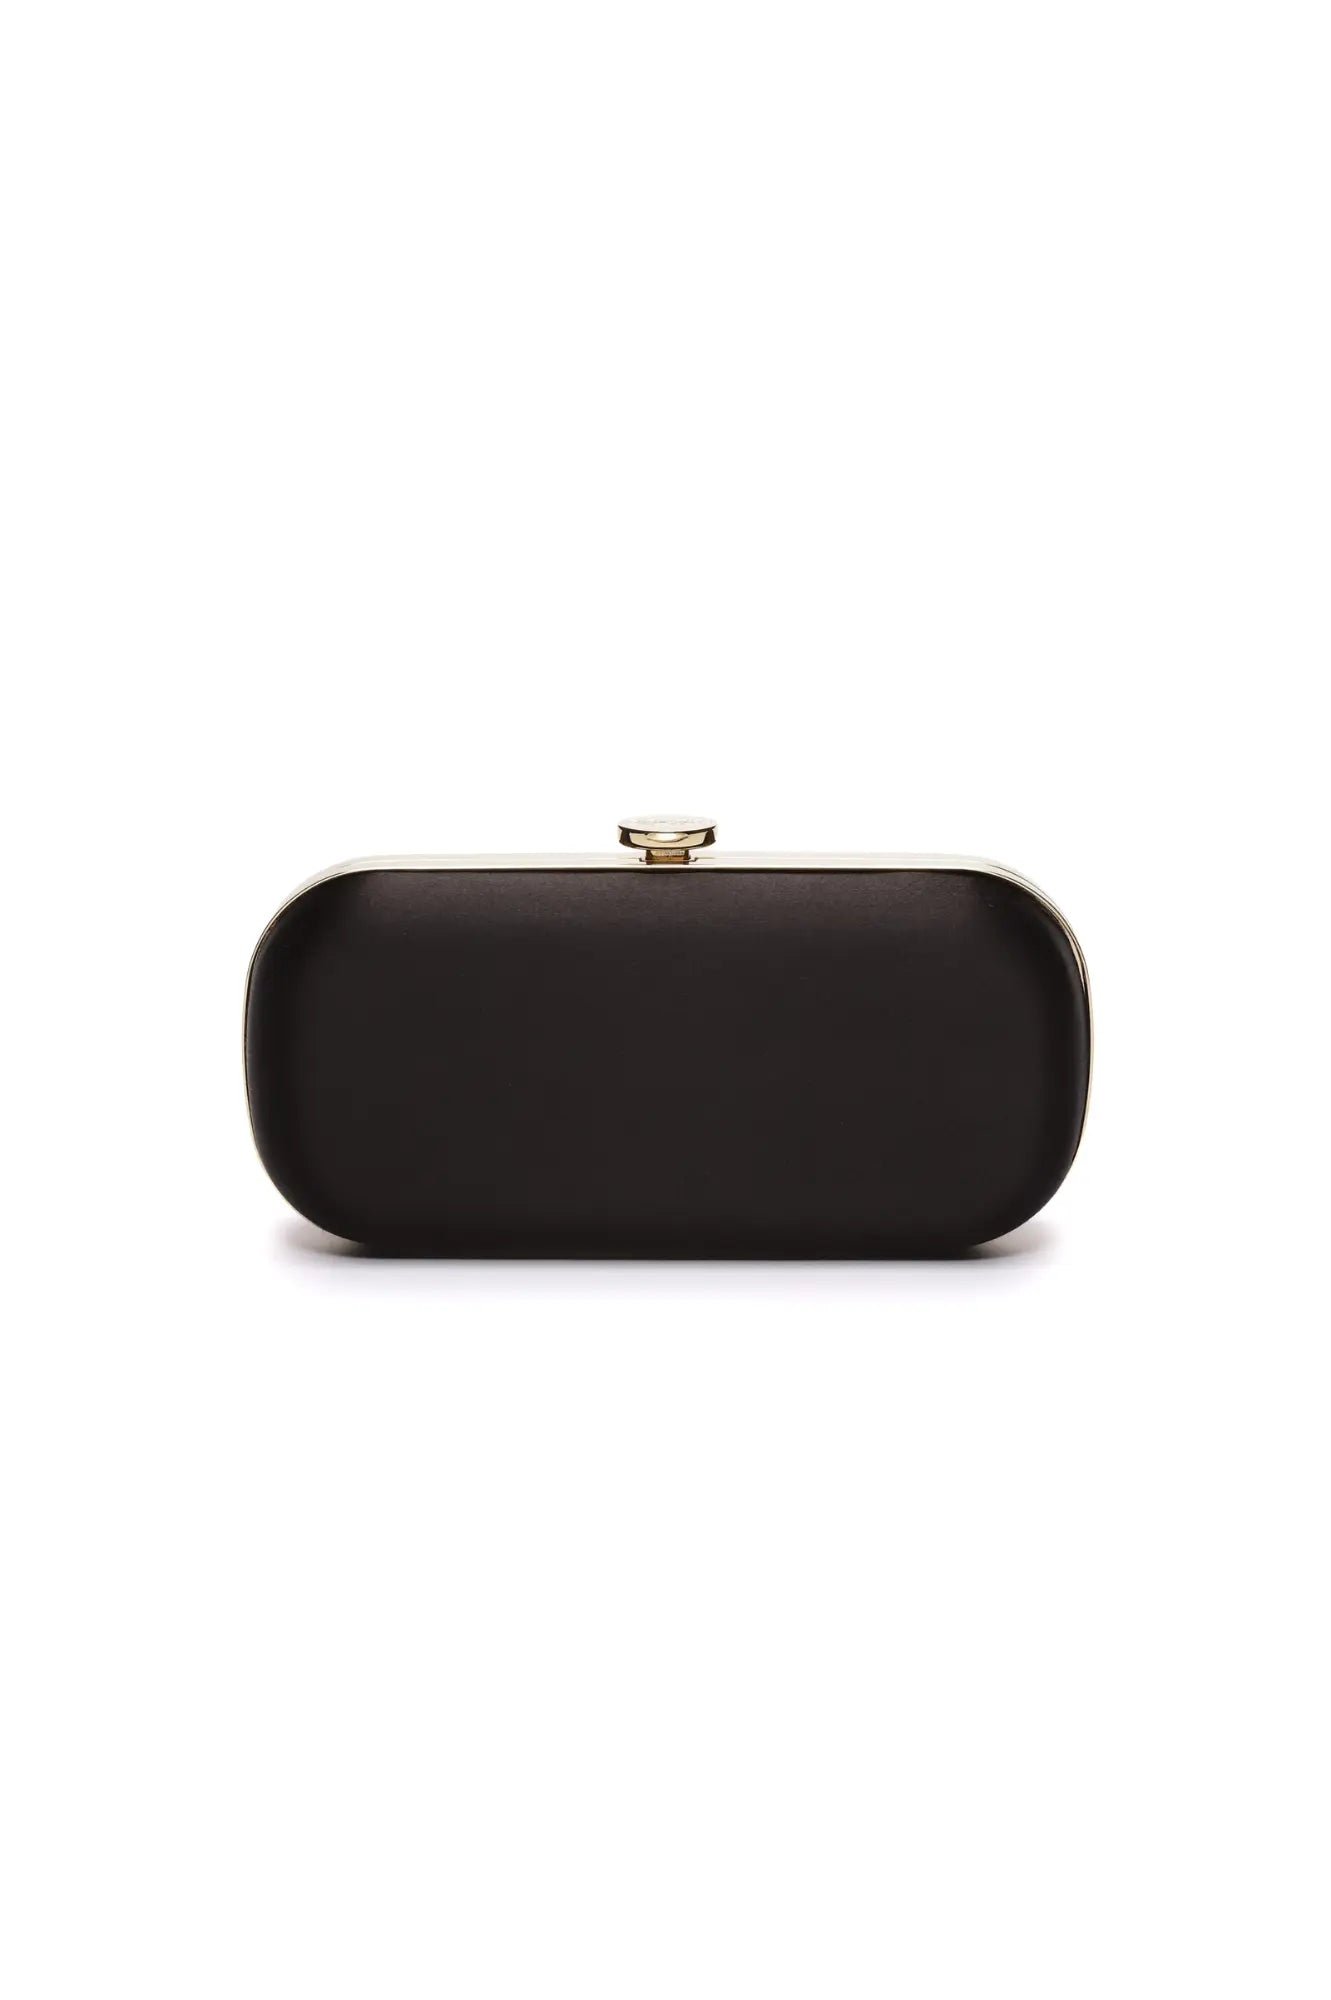 The Bella Rosa Collection's Bella Clutch Black Petite on a white background.